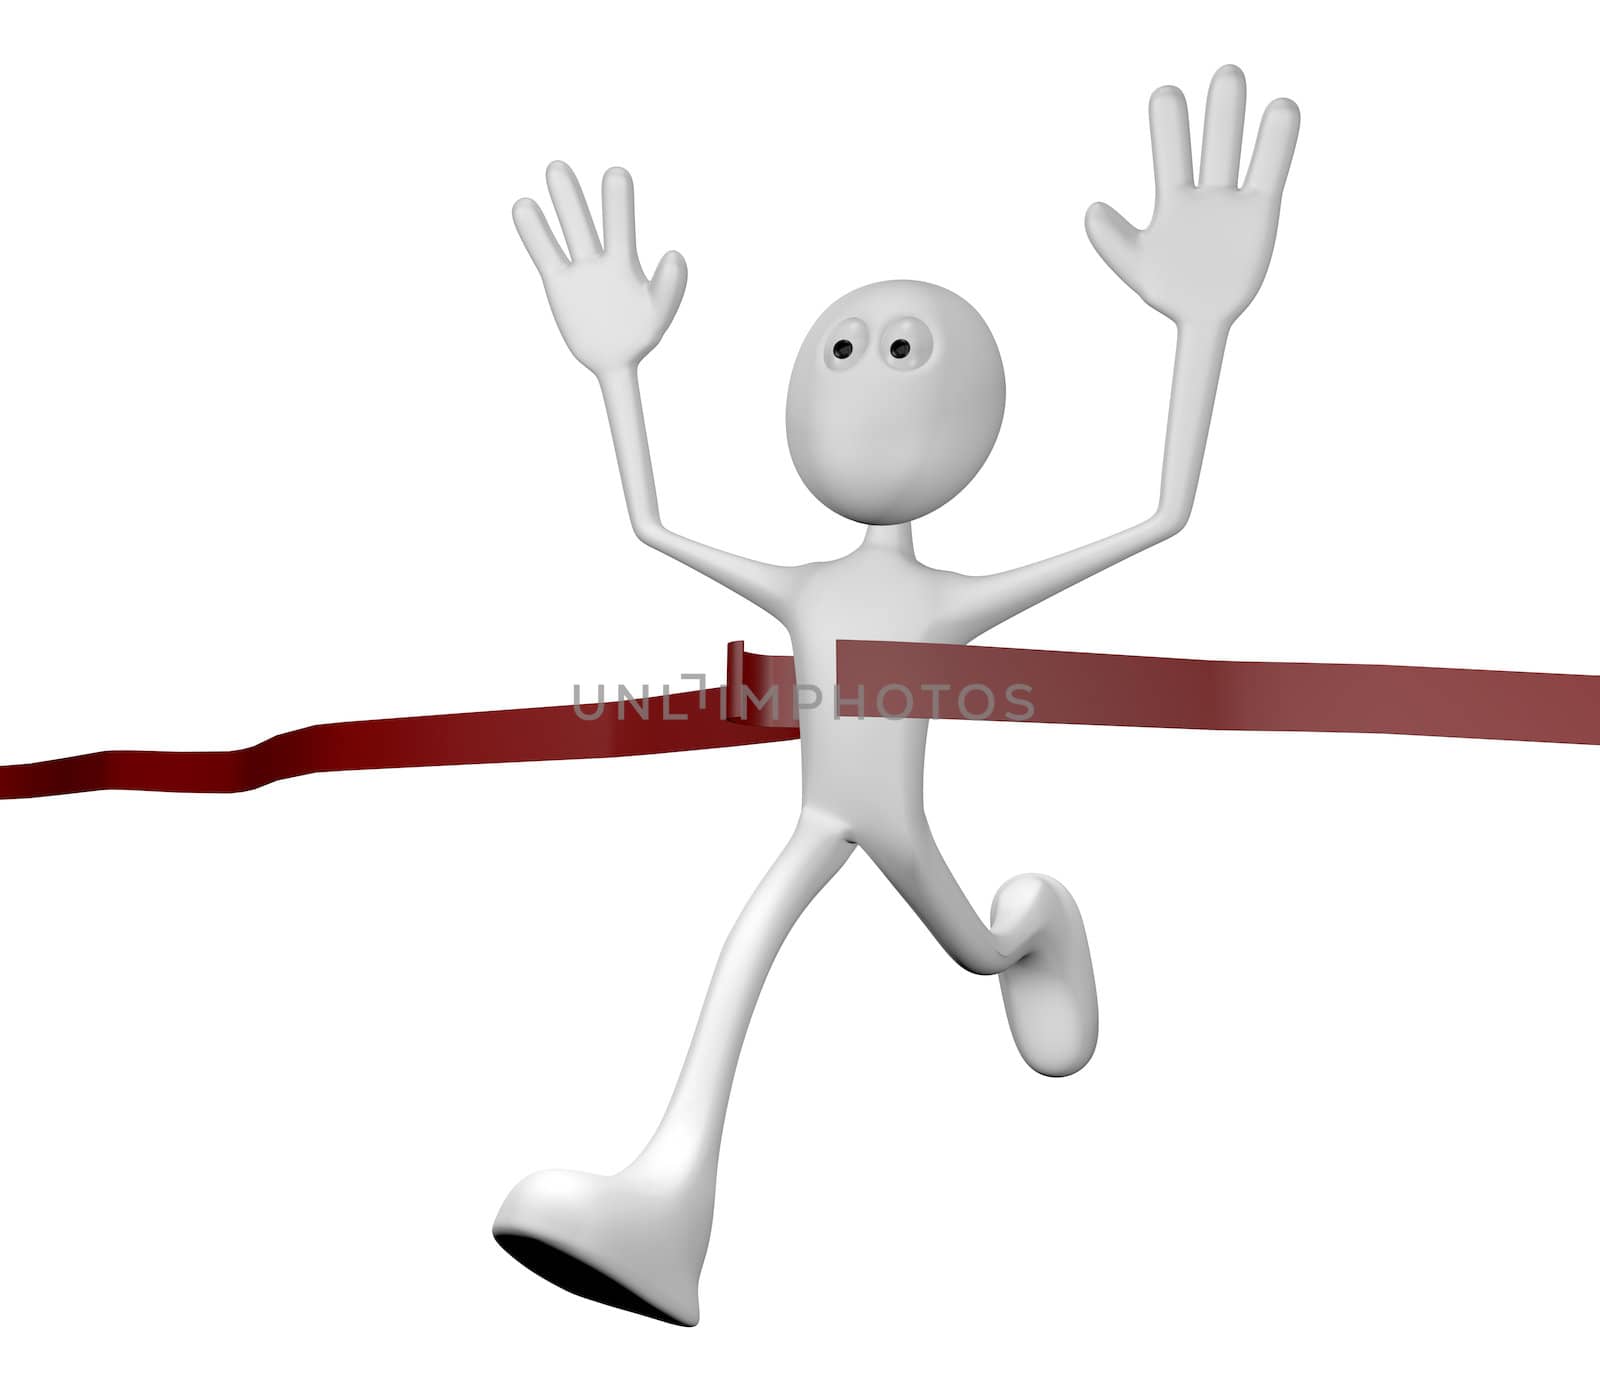 cartoon character crossing the finishing line - 3d illustration